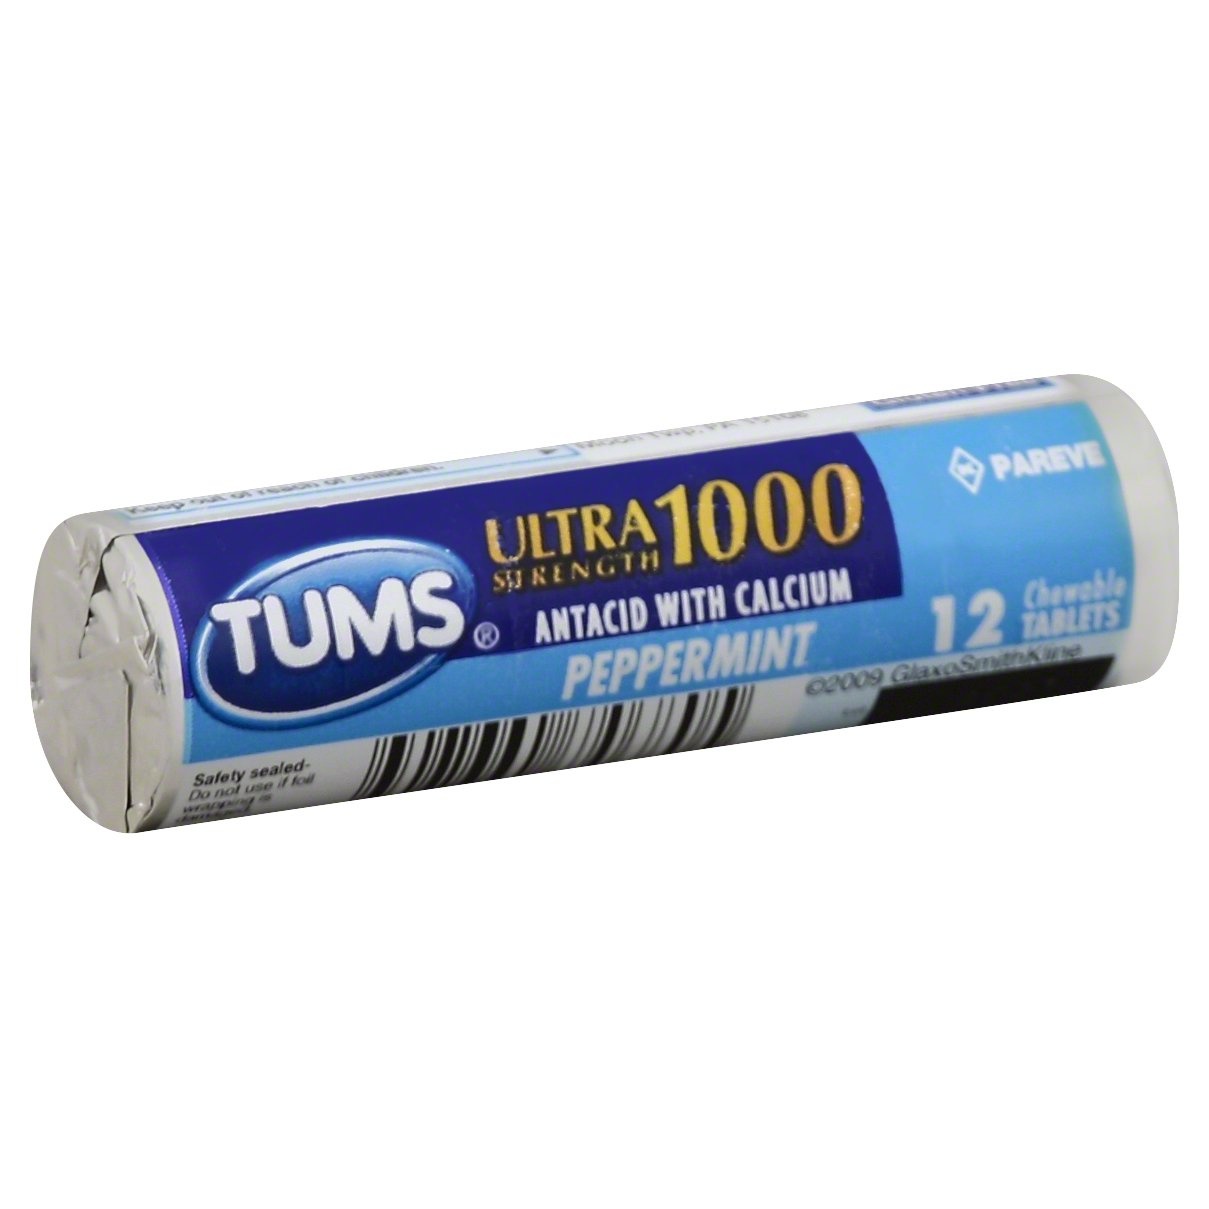 slide 1 of 1, TUMS Chewable Antacid Tablets for Ultra Strength Heartburn Relief, Peppermint - 12 Count Rolls, 12 ct